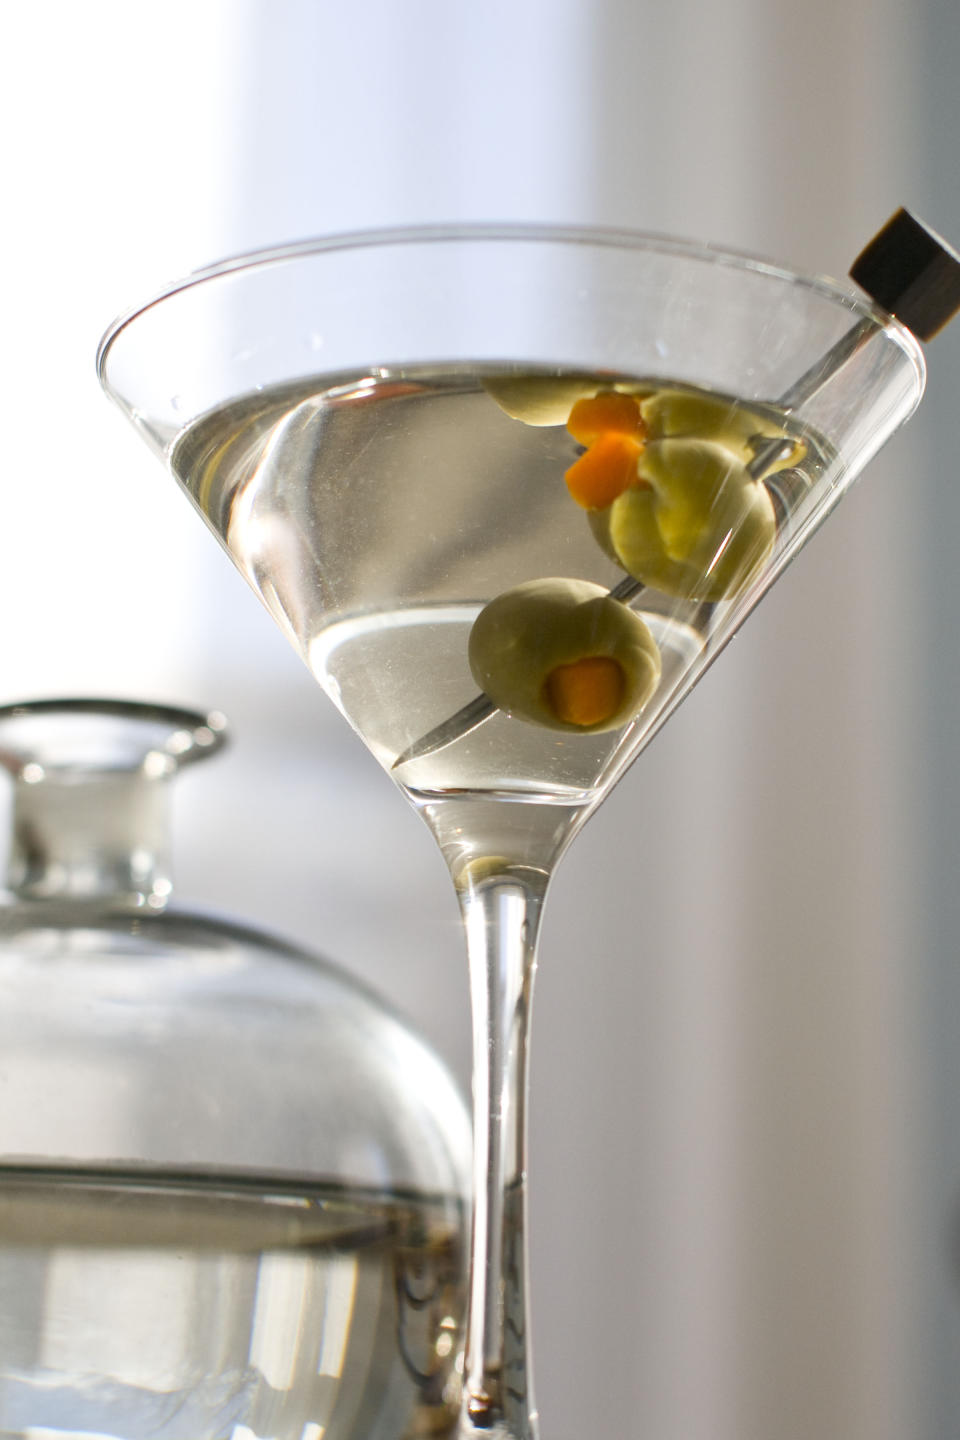 In this Feb. 13, 2012 photo taken in Concord, N.H., a classic martini made with gin and vermouth is shown. (AP Photo/Matthew Mead)